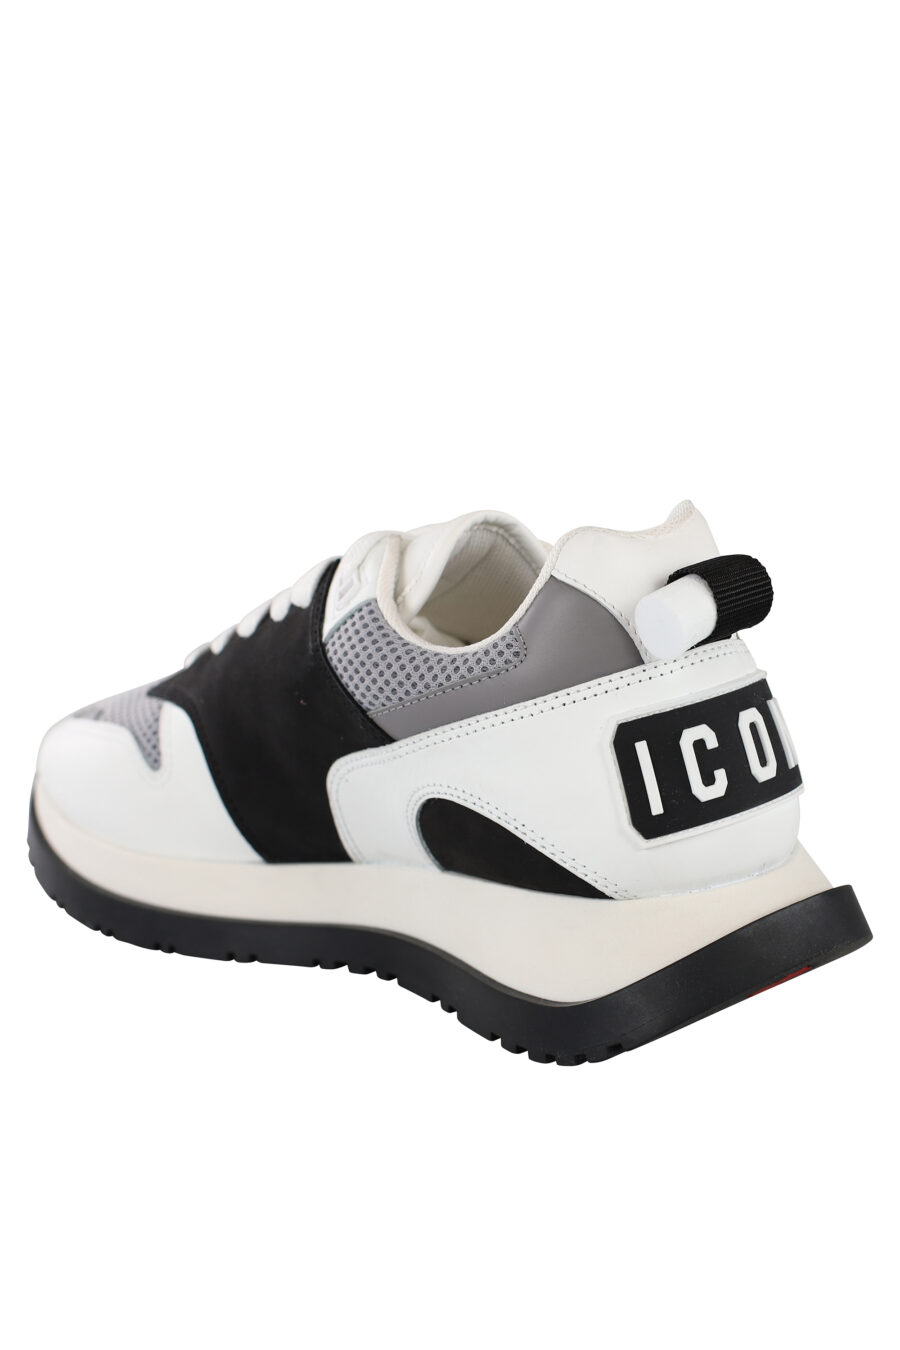 White trainers with black and grey detail with logo on sole - IMG 6890